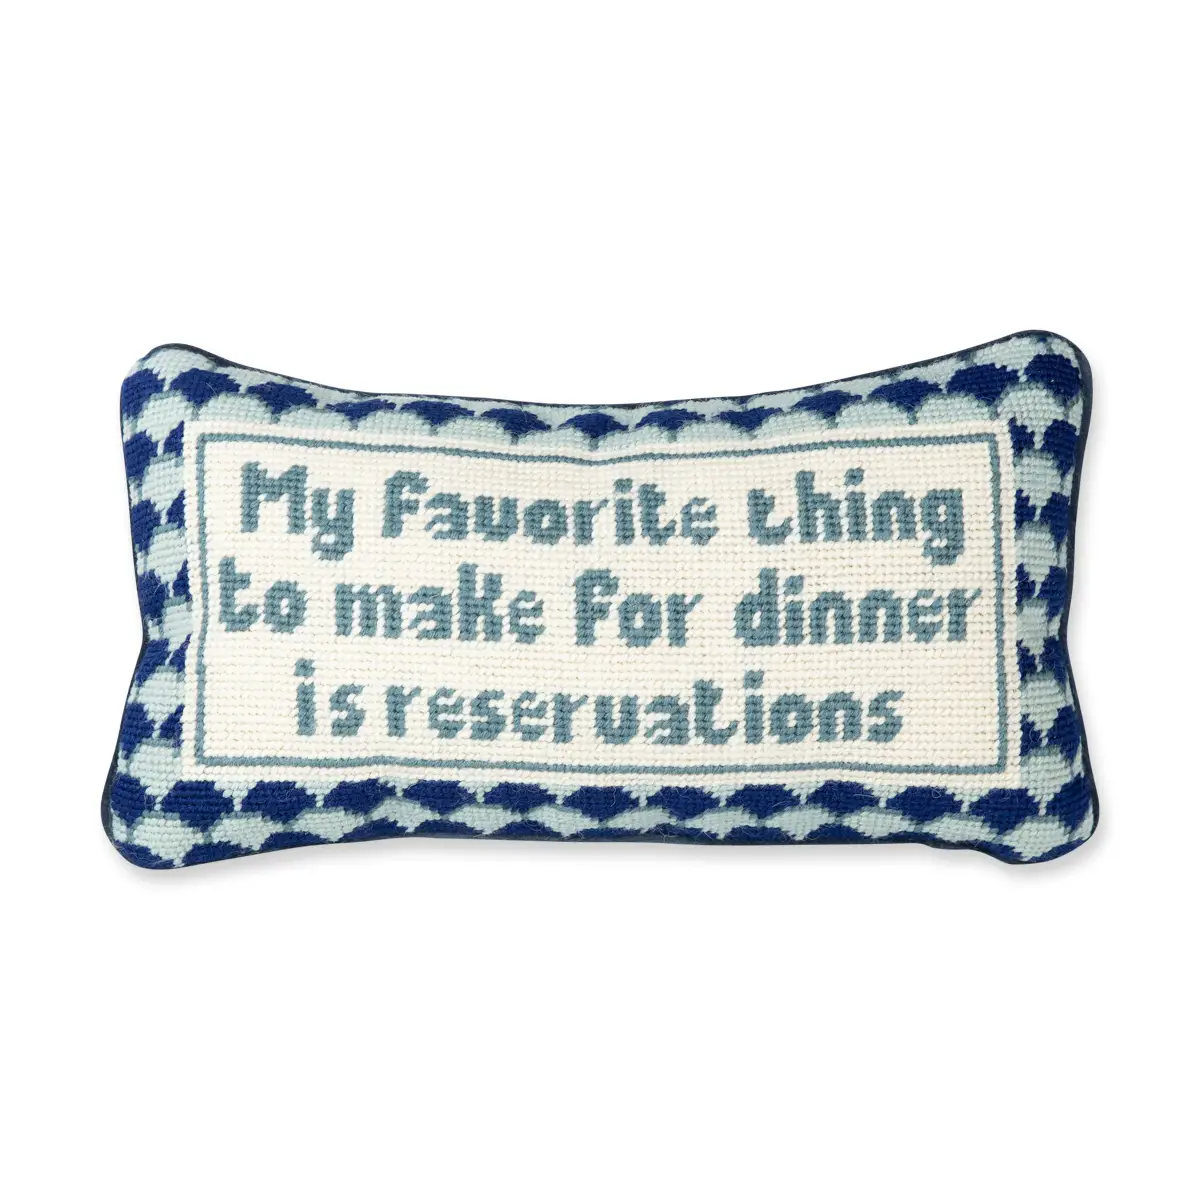 The Best Things in Life Needlepoint Pillow